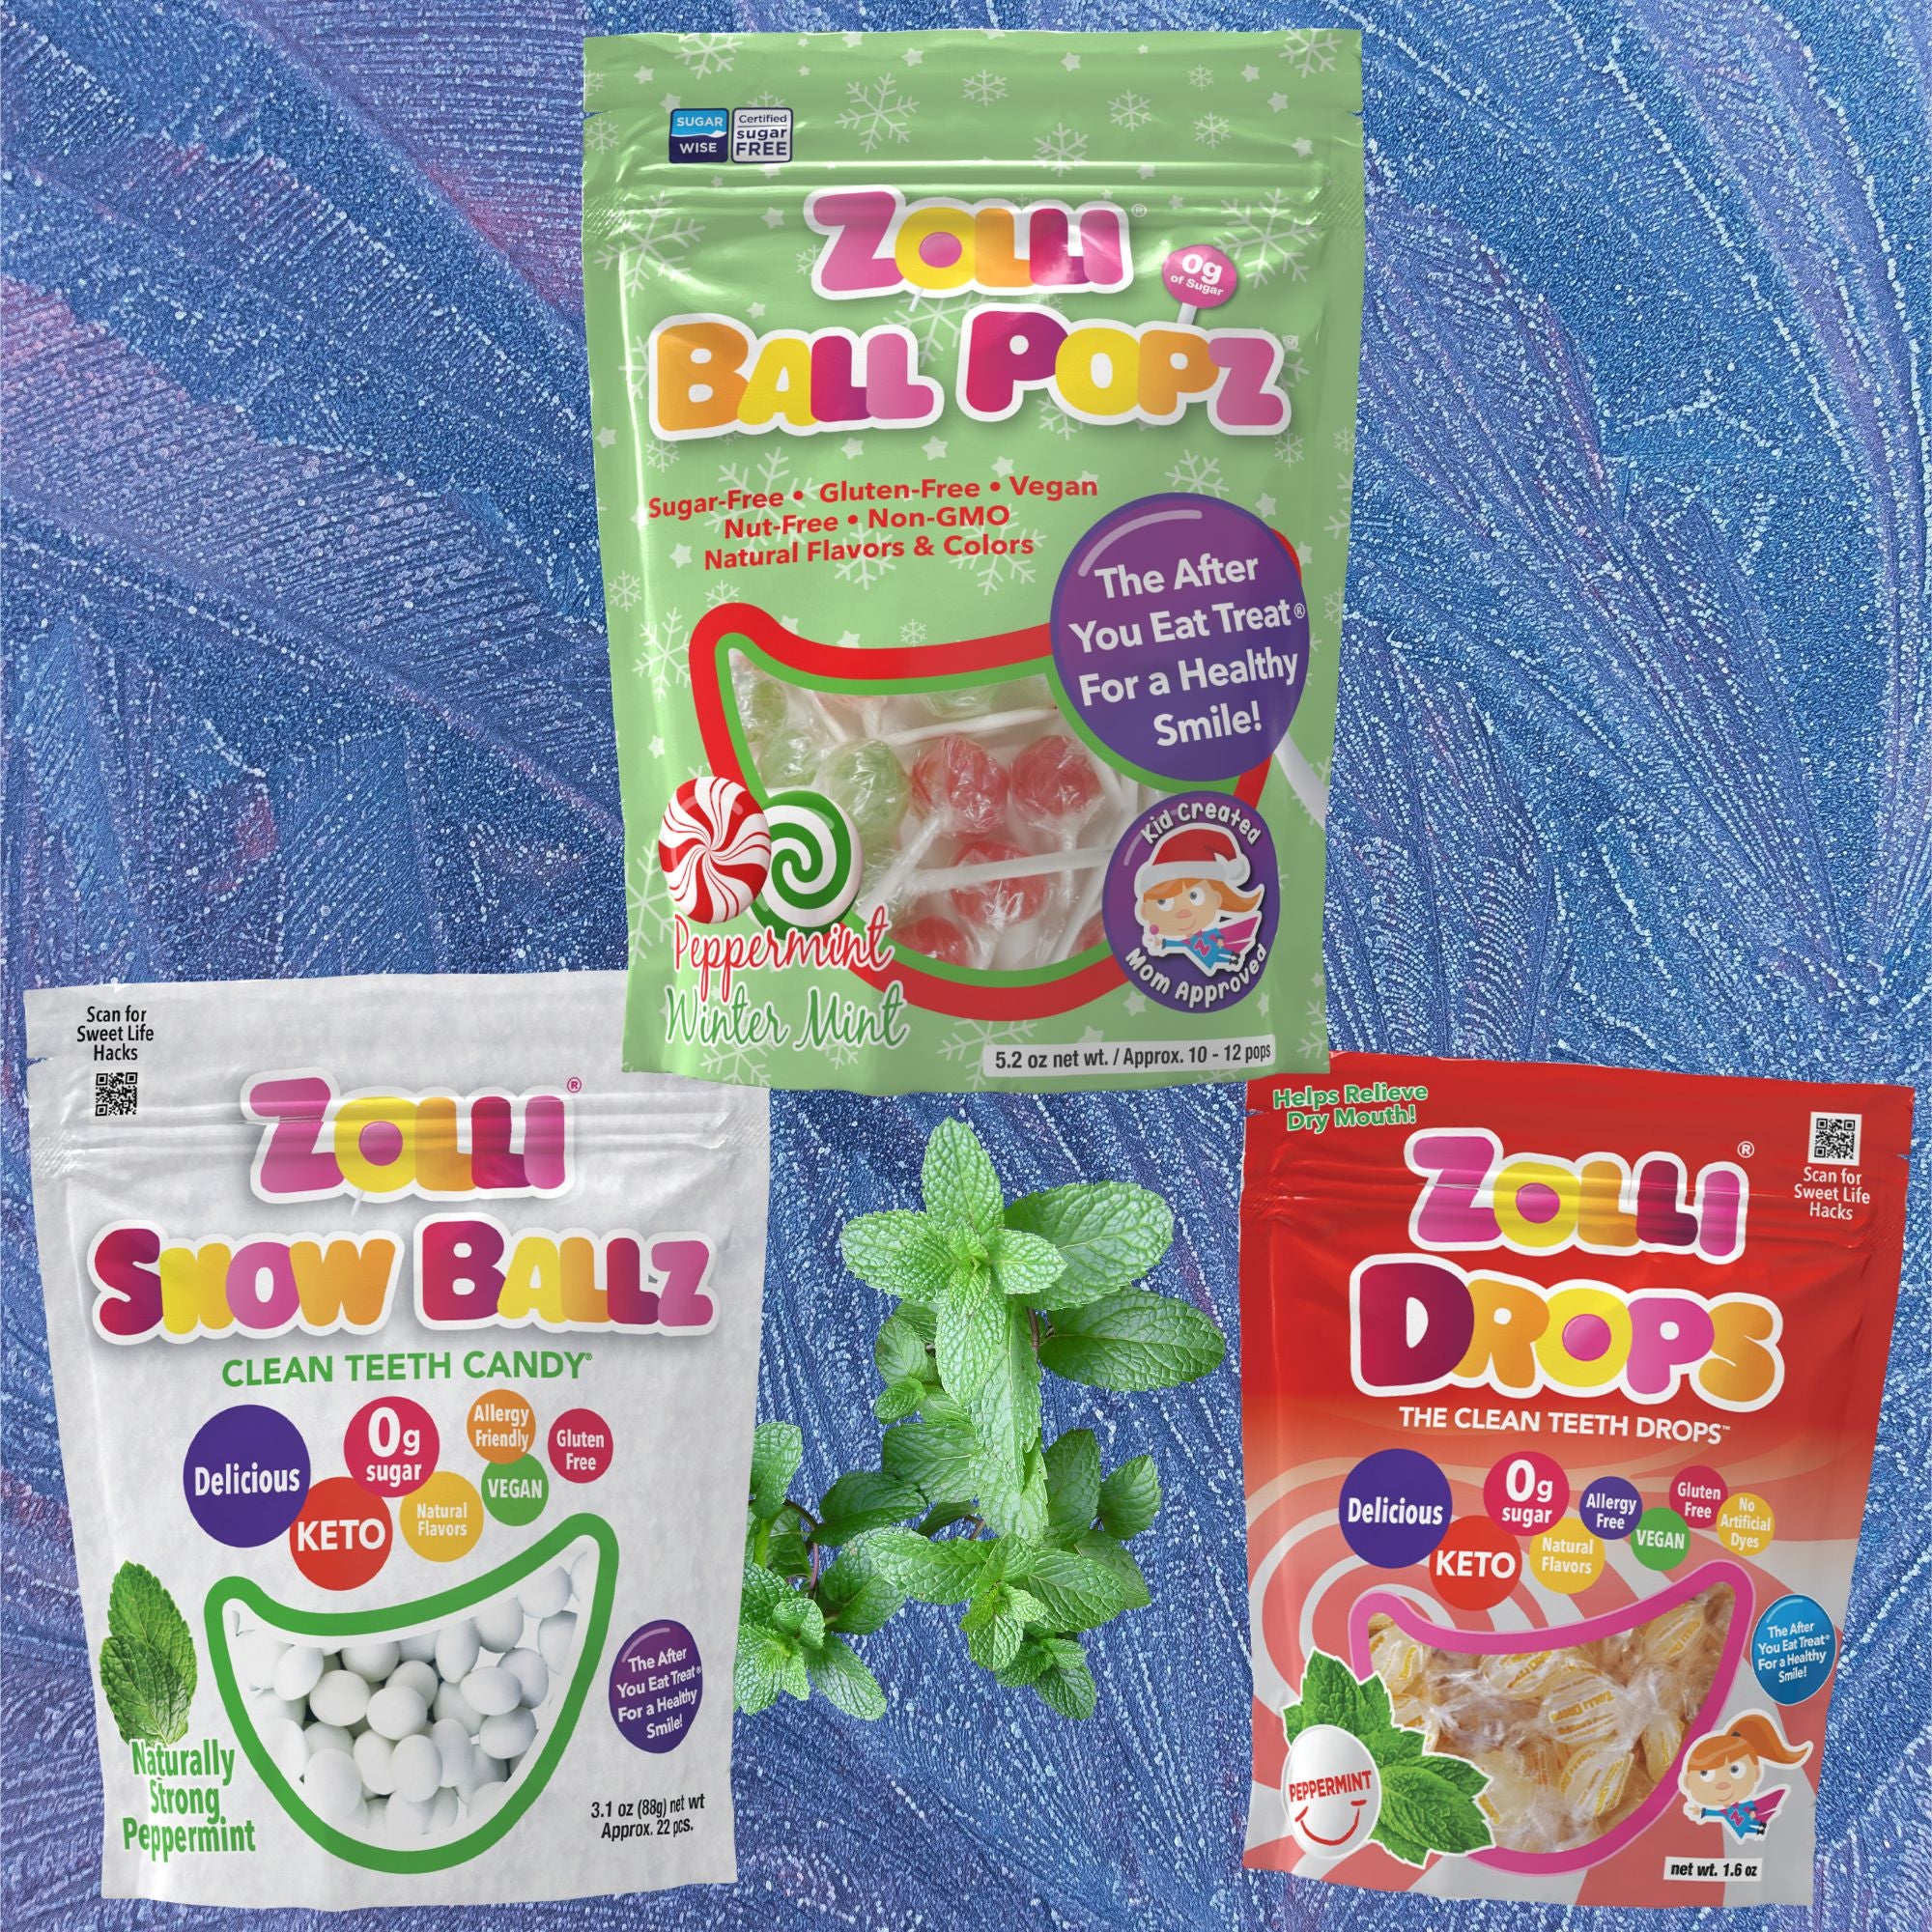 Zolli Peppermint Trio. Zolli Peppermint and Wintermint Ball Popz.  Zolli Peppermint Drops with Xylitol and Zolli Snow Ballz without Xylitol. Fresh Breath. Zero Sugar. Clean Teeth Candy.